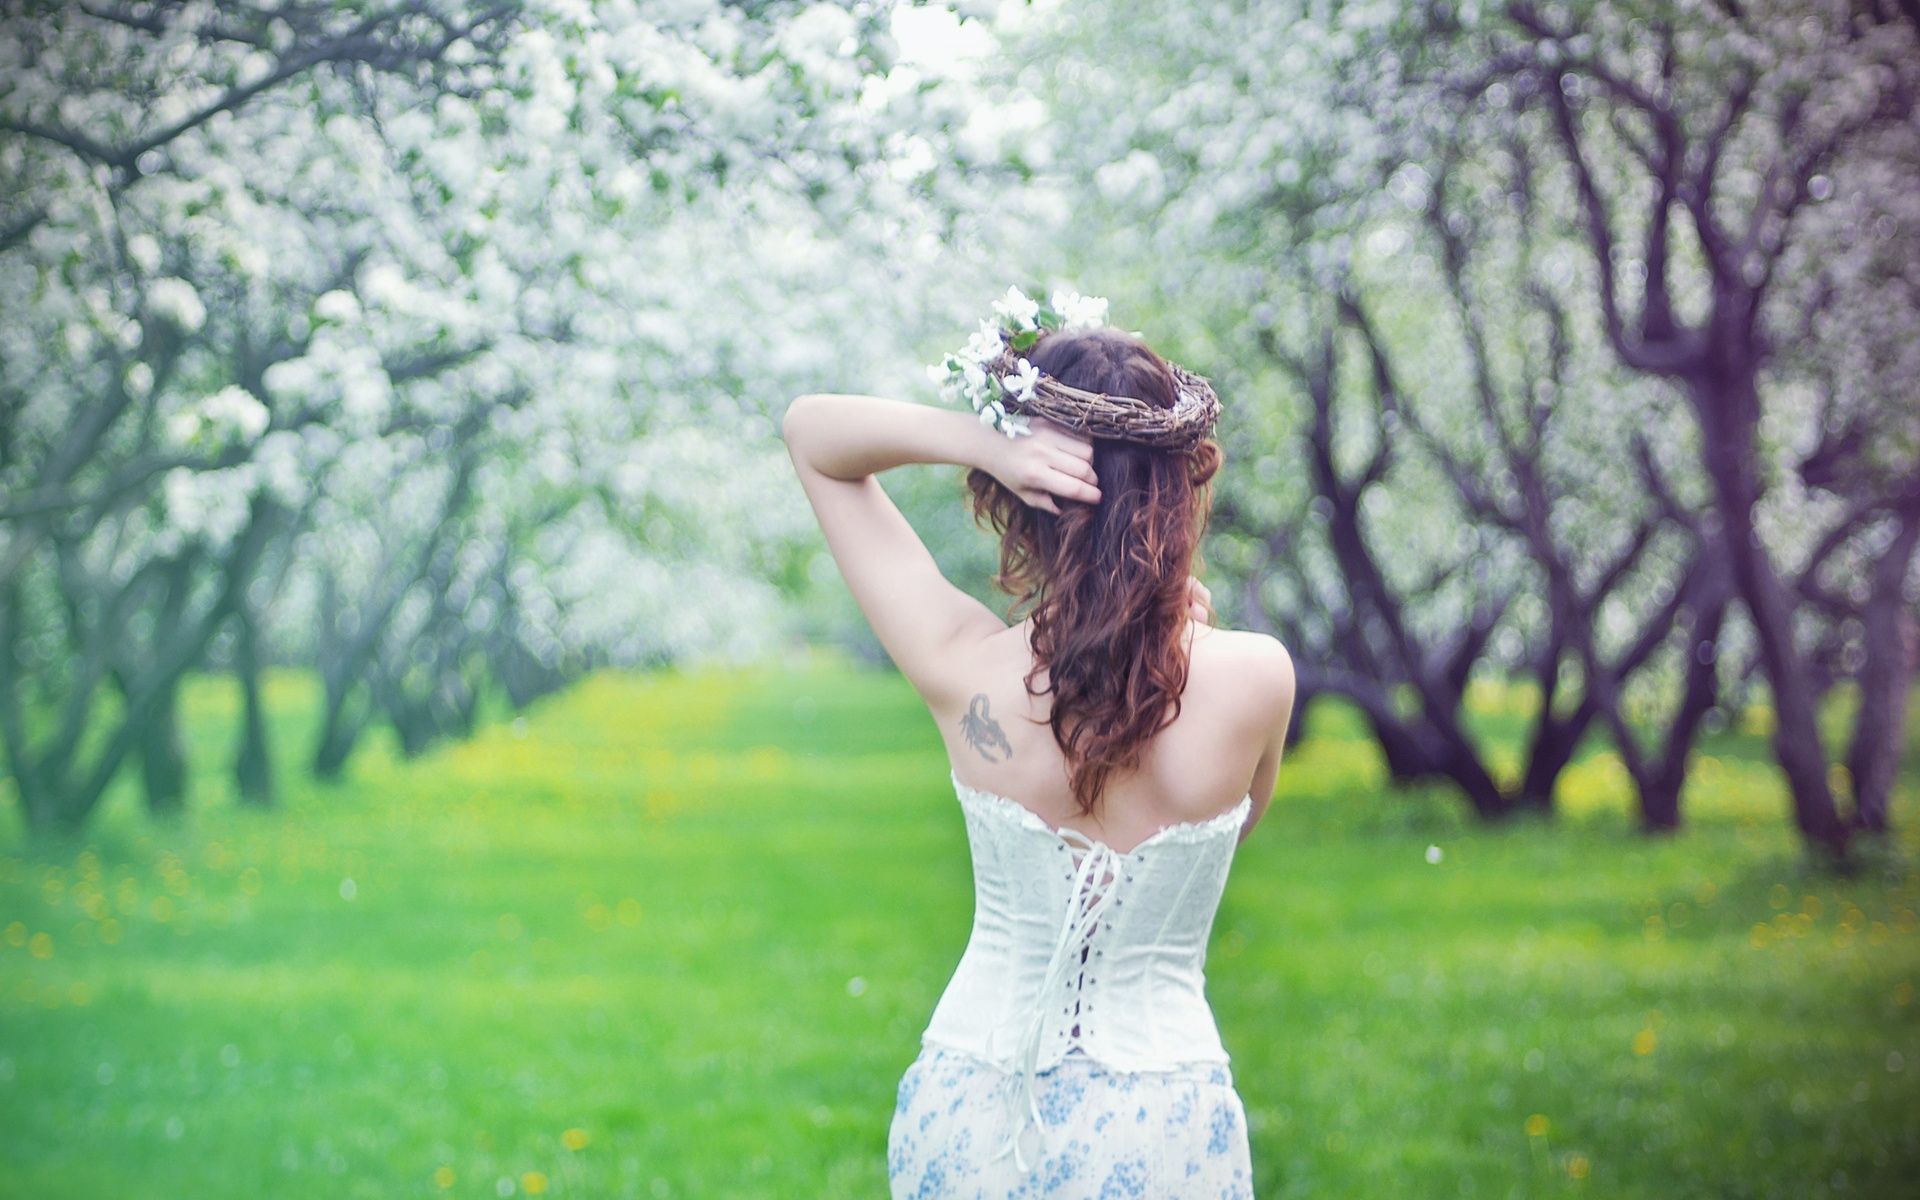 gothic, Spring, Seasons, Orchard, Trees, Blossoms, Flower, Grass, Photography, Dress, Witch, Occult, Dress, Corset, Shoulder, Pale, People, Mood, Brunette, Tattoo, Women, Females, Girls, Models, Babes, Style, Sen Wallpaper